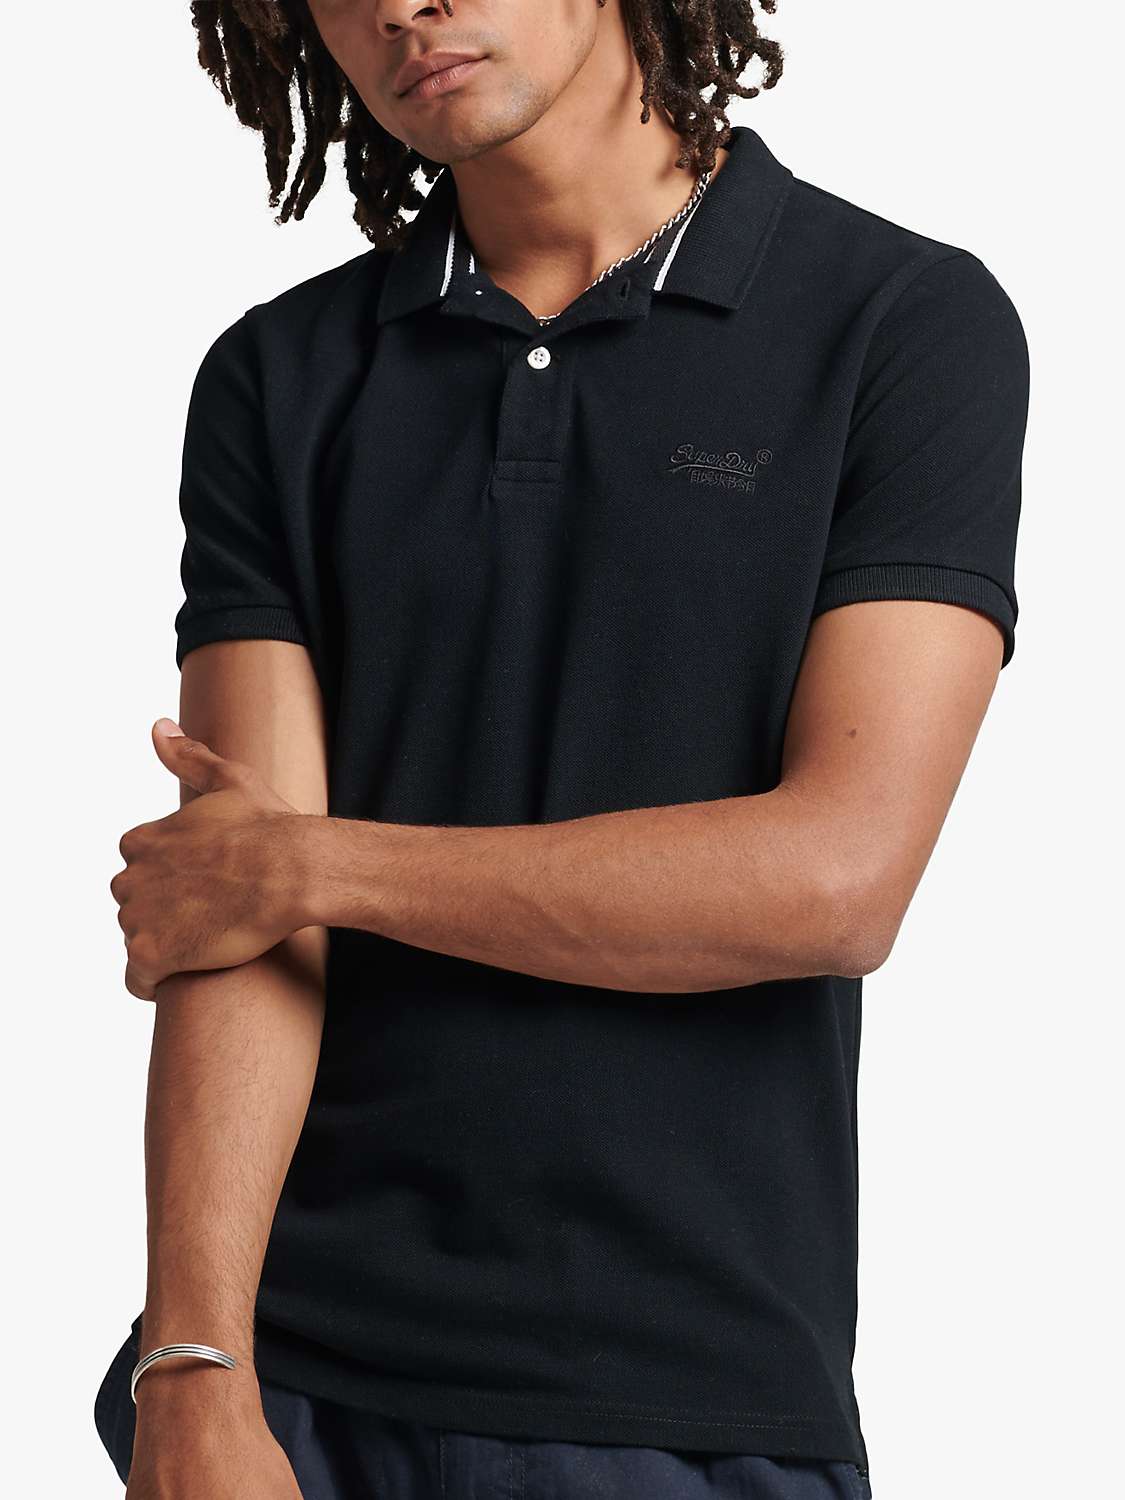 Buy Superdry Classic Pique Organic Cotton Polo Shirt Online at johnlewis.com